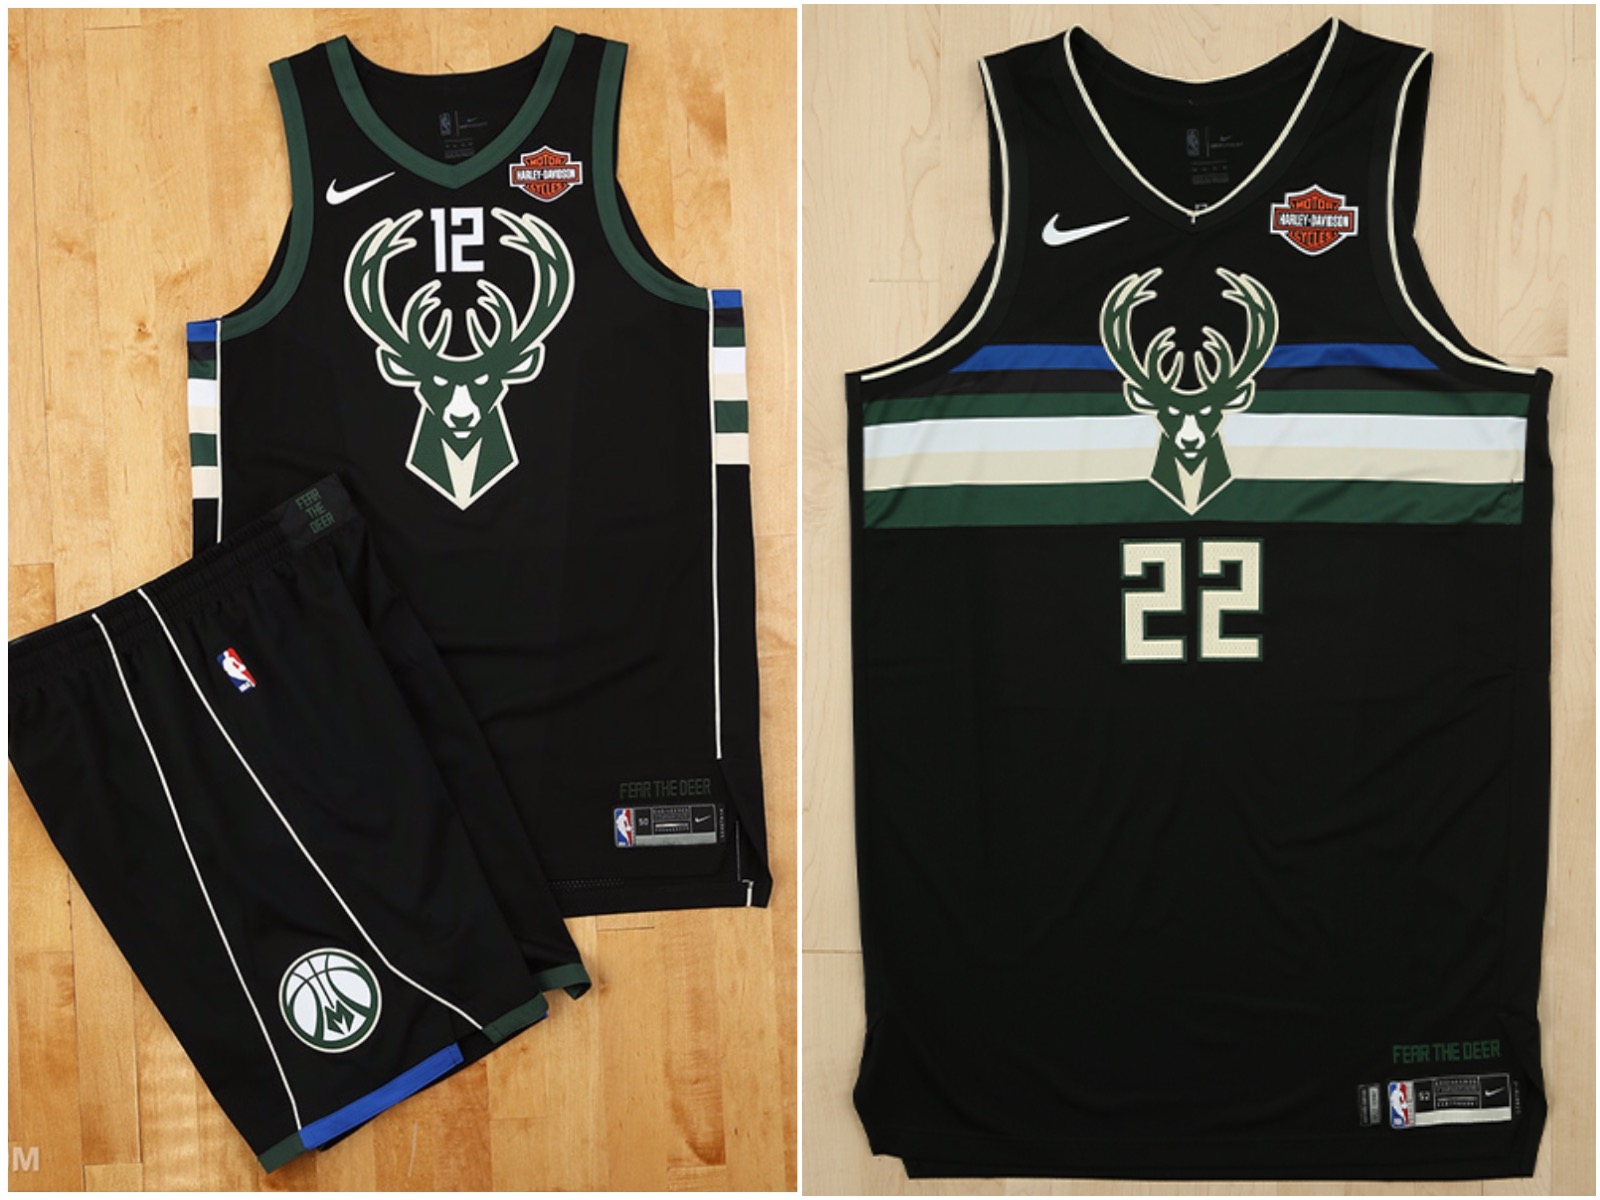 The Bucks will wear these MECCA-inspired jerseys 12 times this season